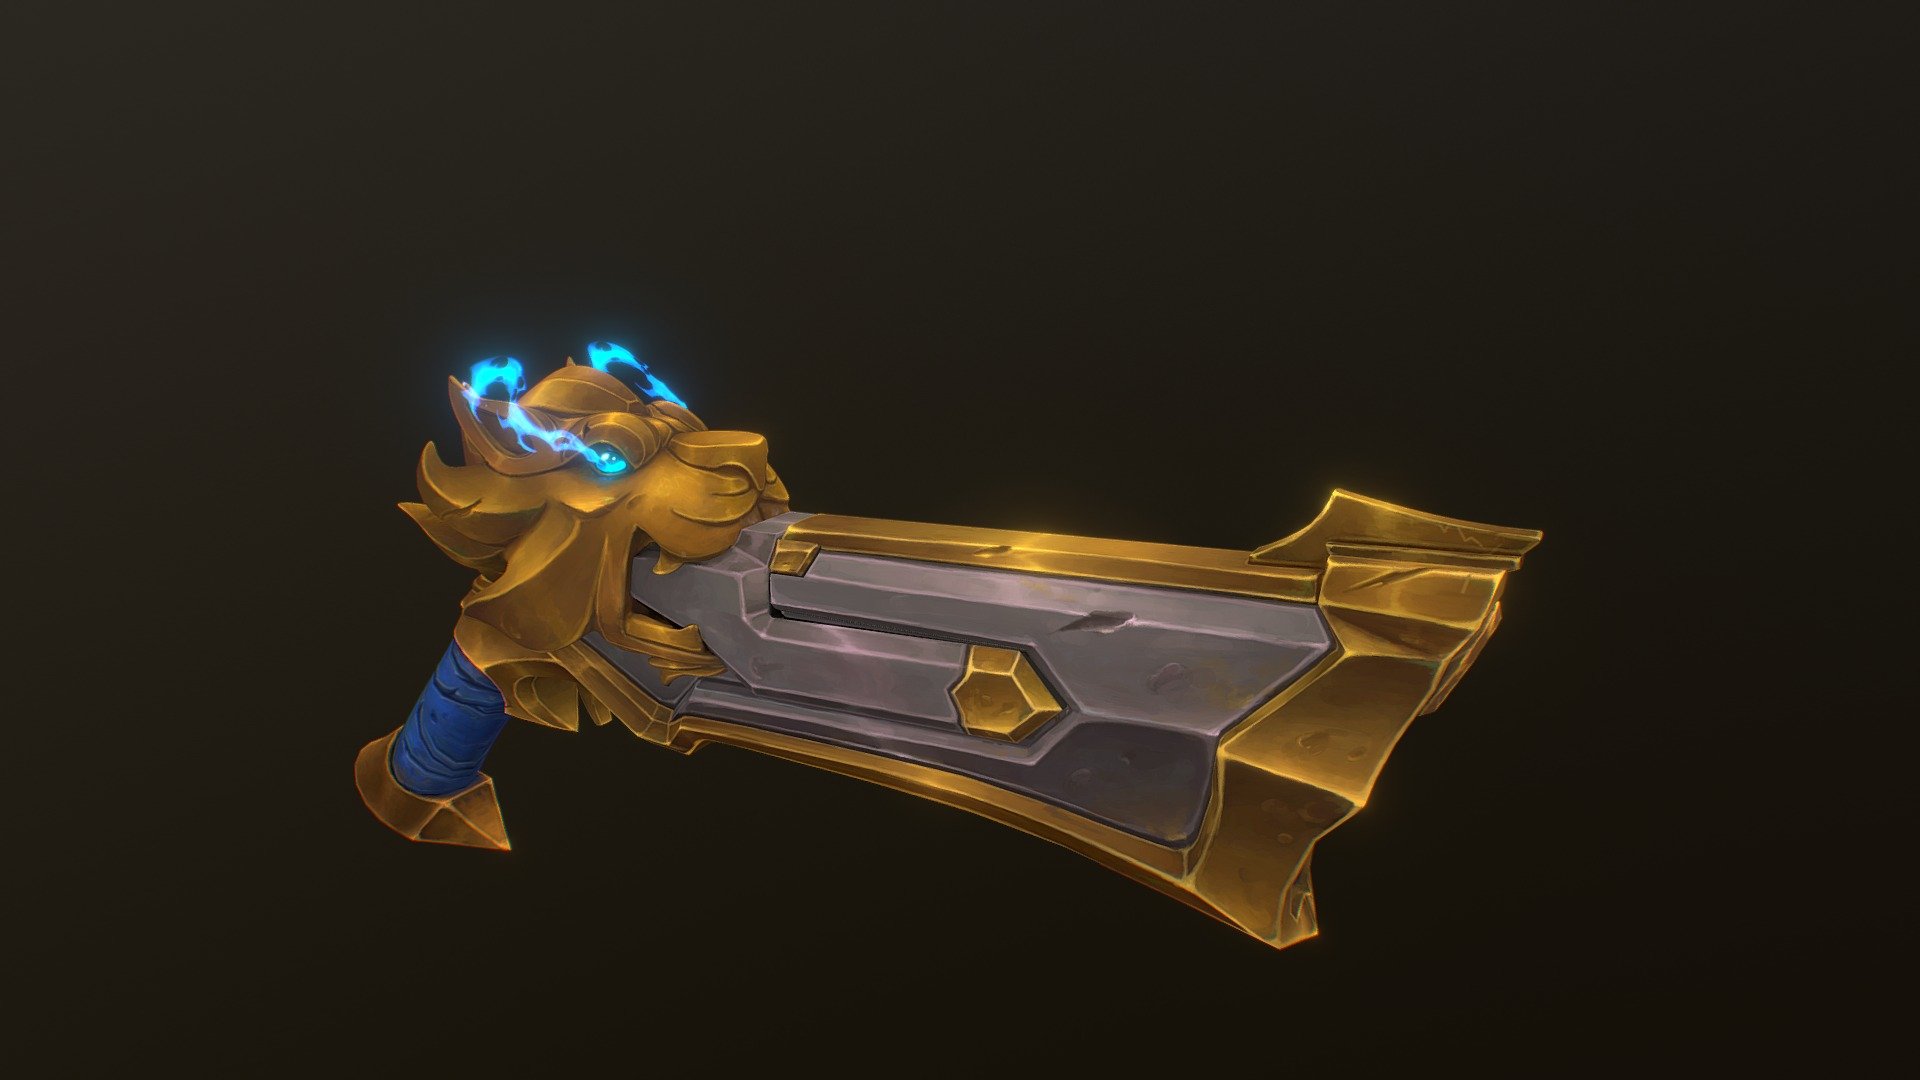 Hey all! Lex is my favorite characters from Paladins. I decided that he needed a gun that could express his character of Justice and Power

I hope you guys enjoy it and like it as much as I did.

Thanks! - Lionheart Lex - 3D model by Daryl Uribe (@viller) 3d model